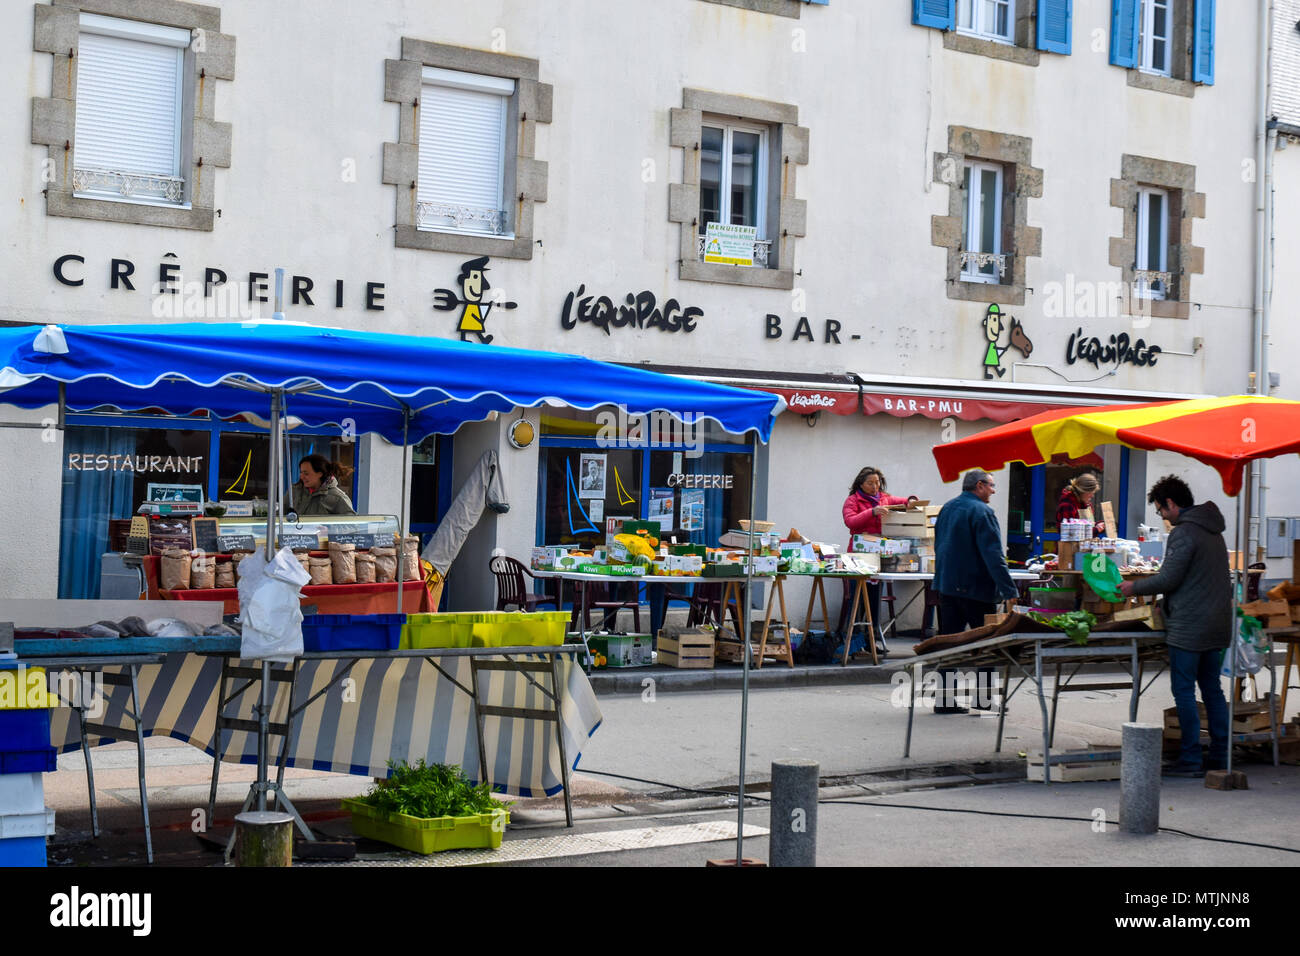 Thursday is the weekly market day for the tiny Finistere town of Carantec on the seacoast in Brittany, France. Stock Photo